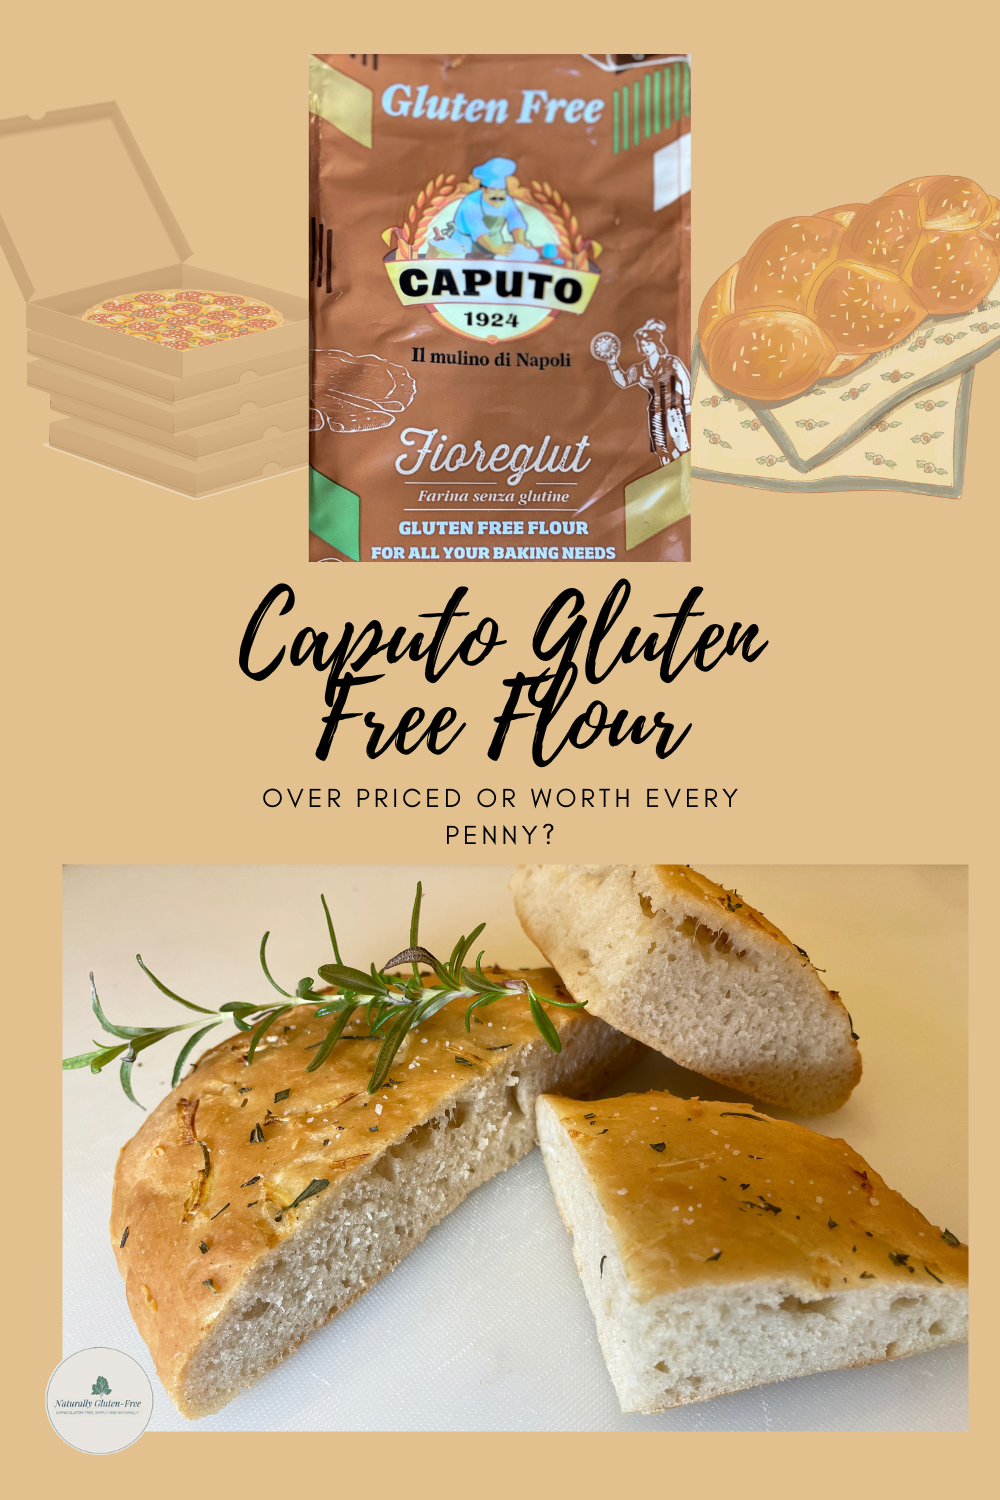 Caputo Gluten Free Flour: Way Too Expensive or Worth Every Penny?